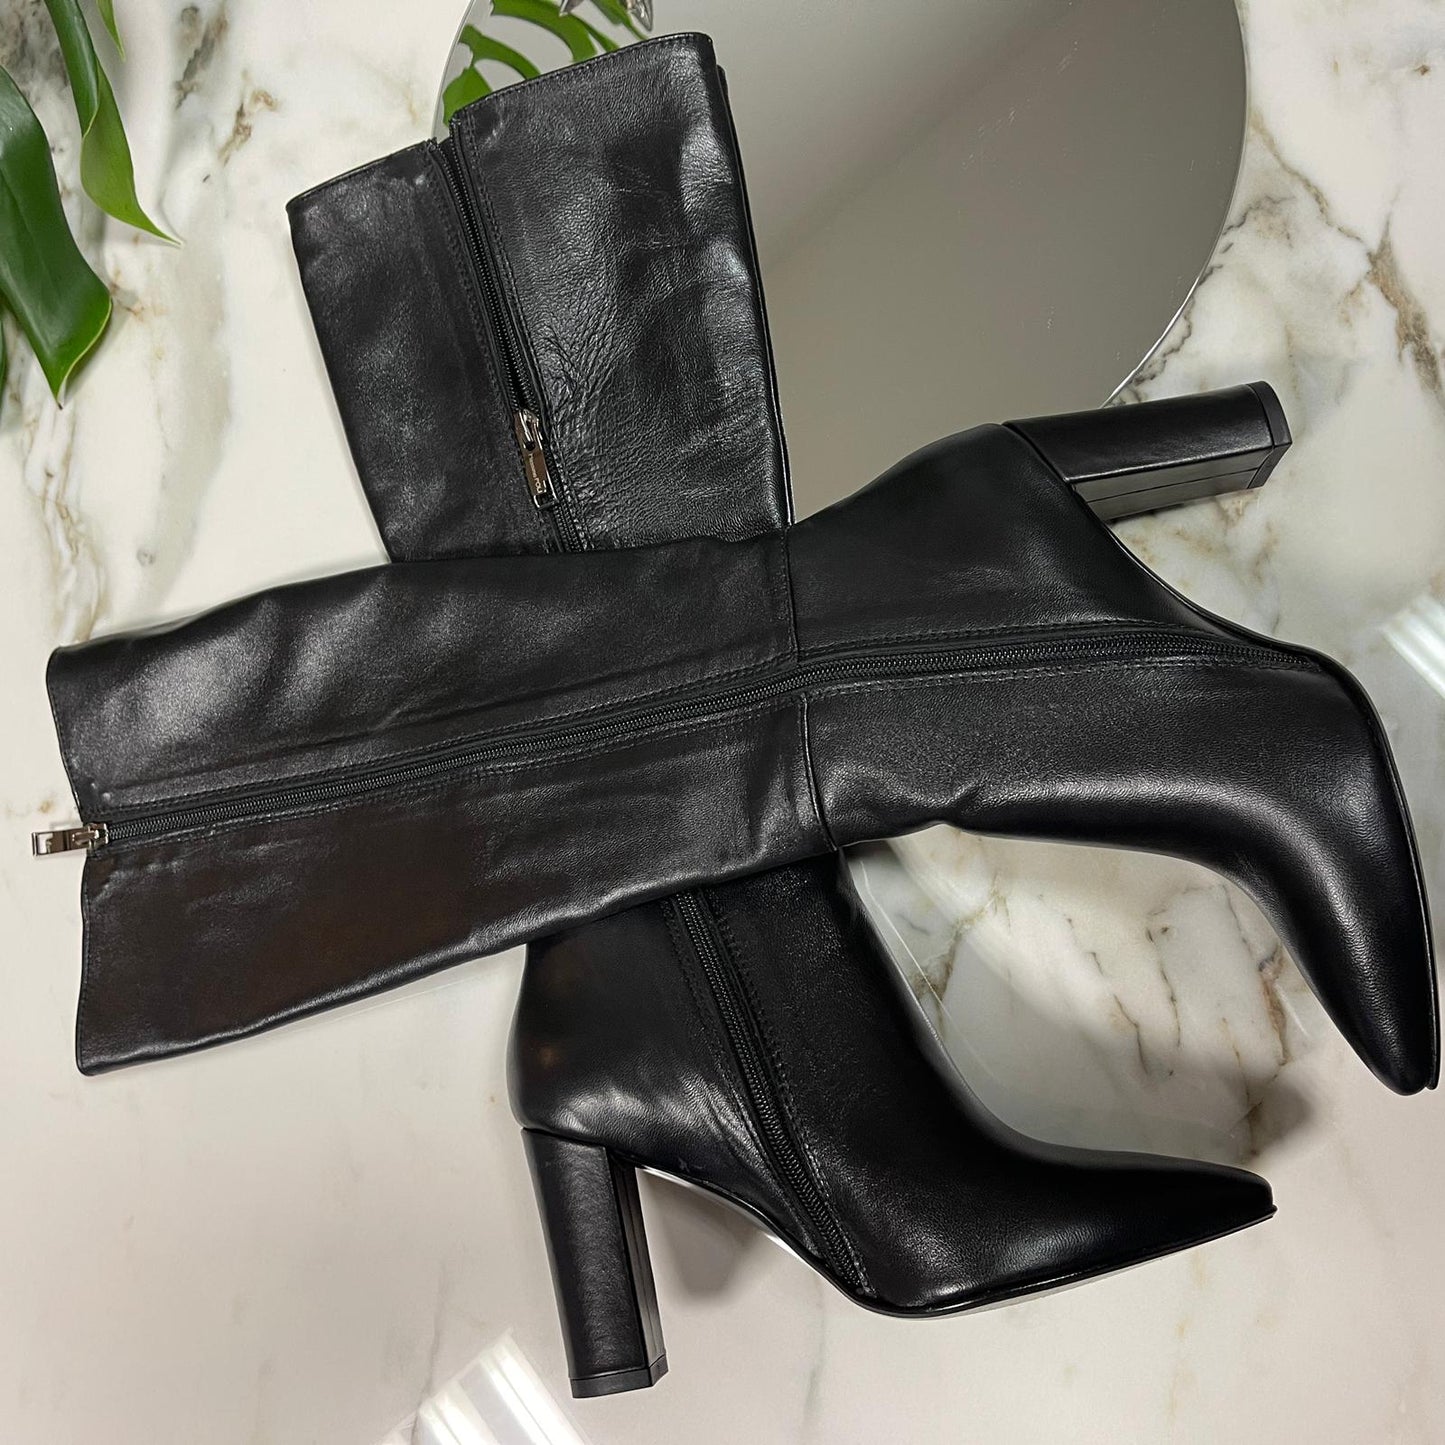 Small size ladies knee heigh boots in black leather